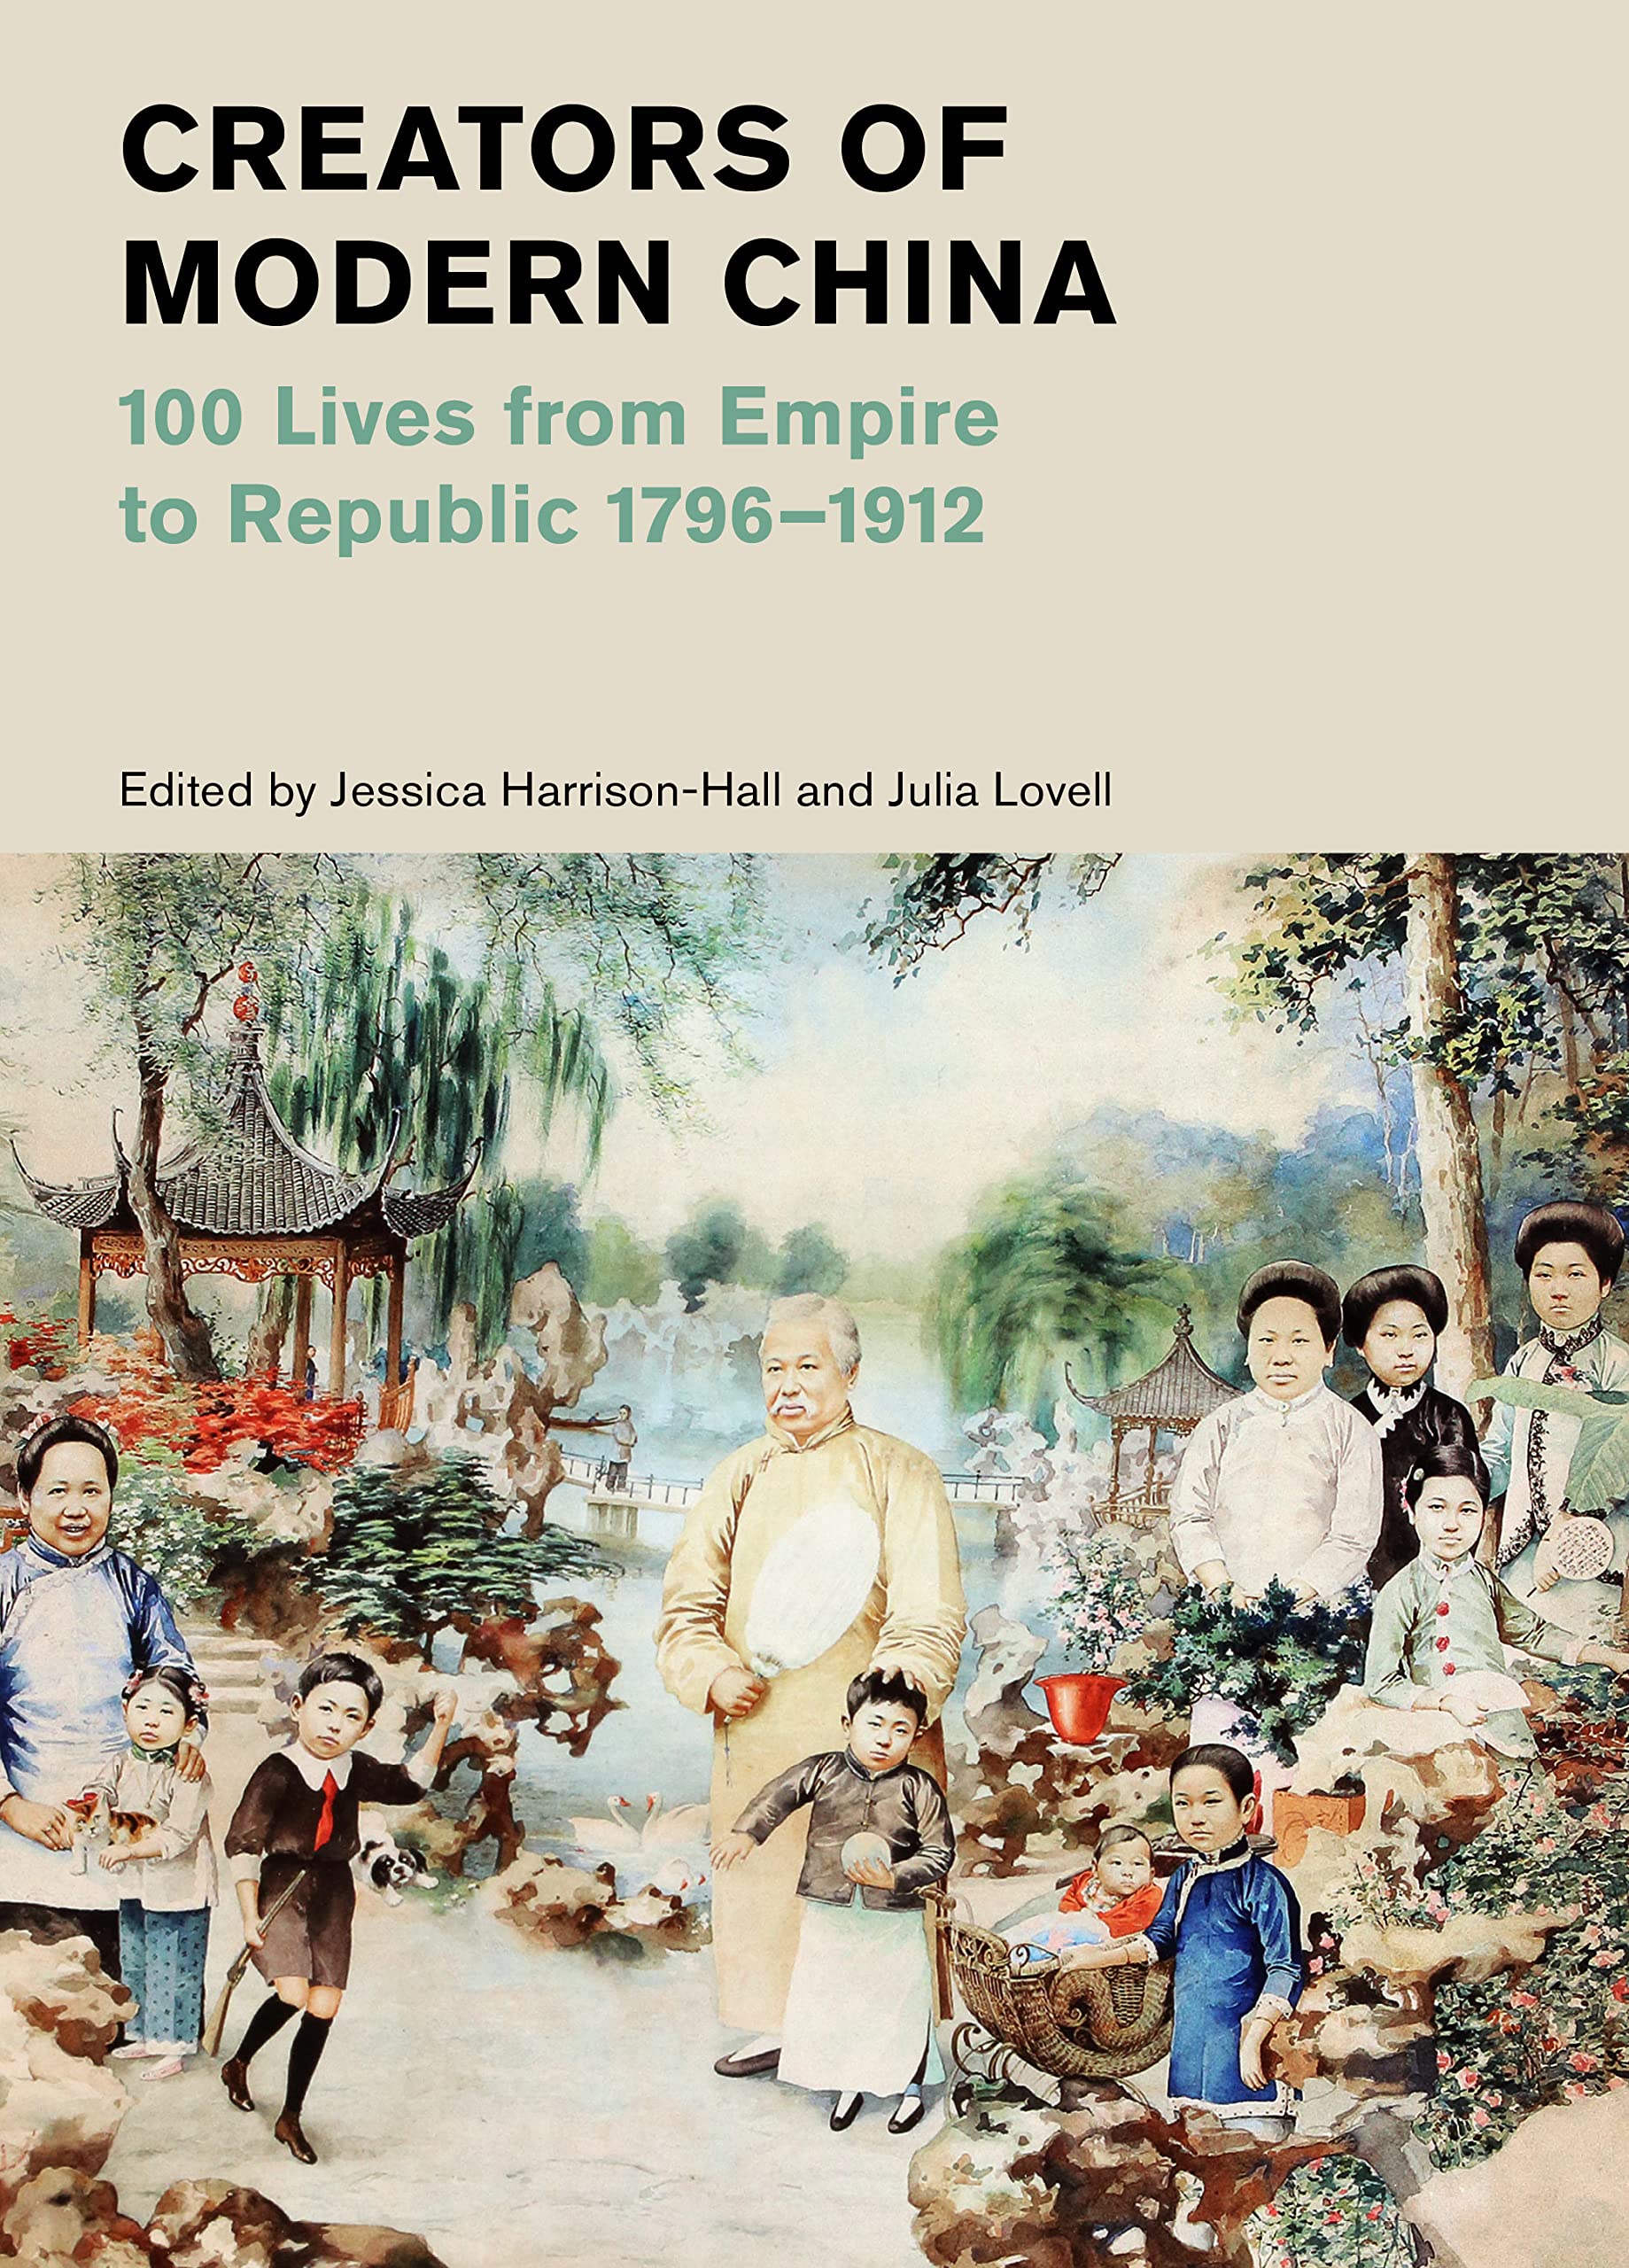 Creators of Modern China: 100 Lives from Empire to Republic 1796-1912